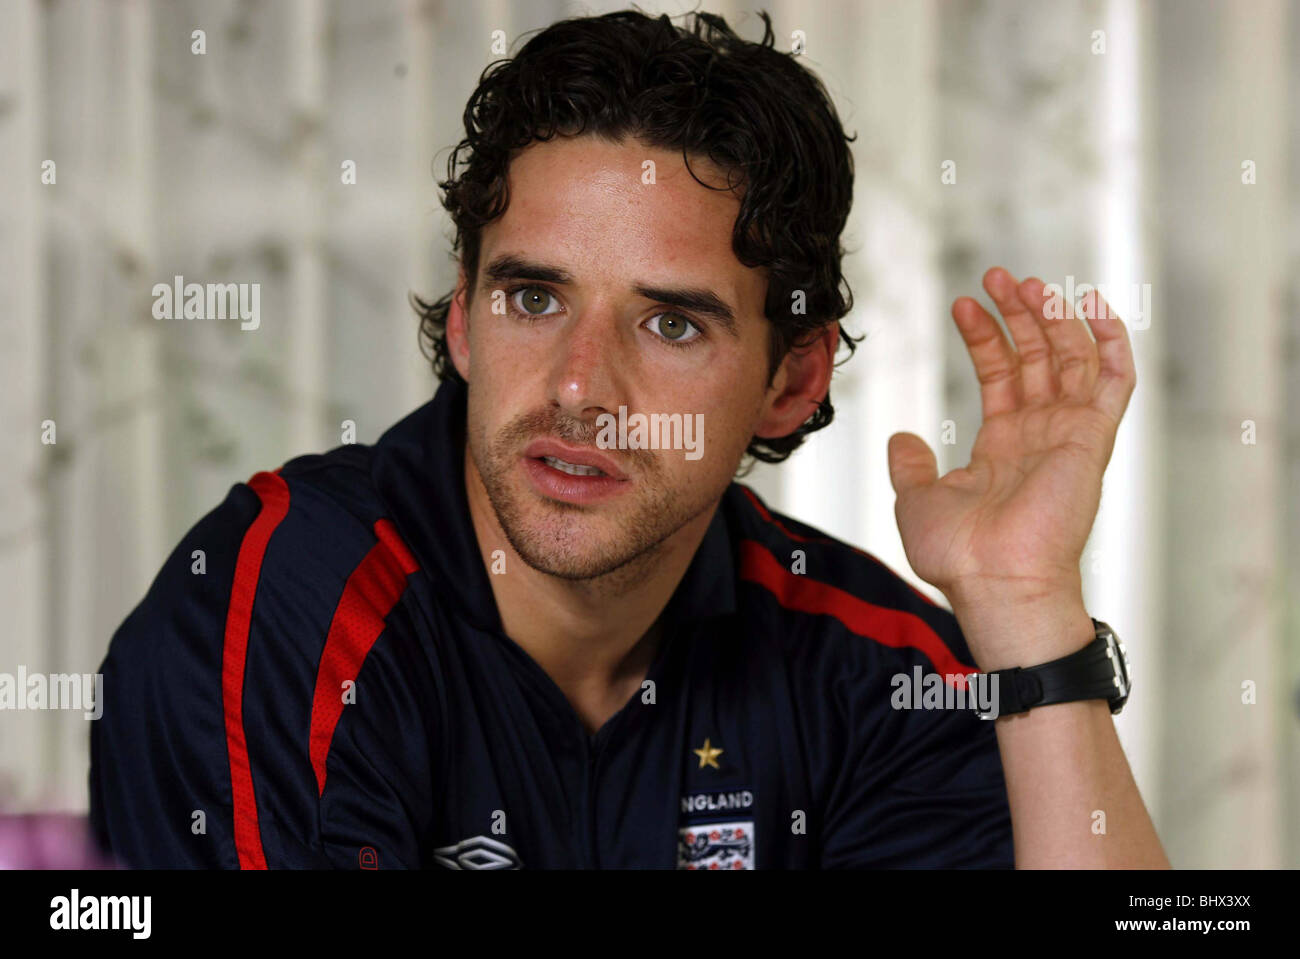 Owen Hargreaves seen here at a photo-shoot before joining the England team for the World Cup finals in Germany June 2006 Stock Photo